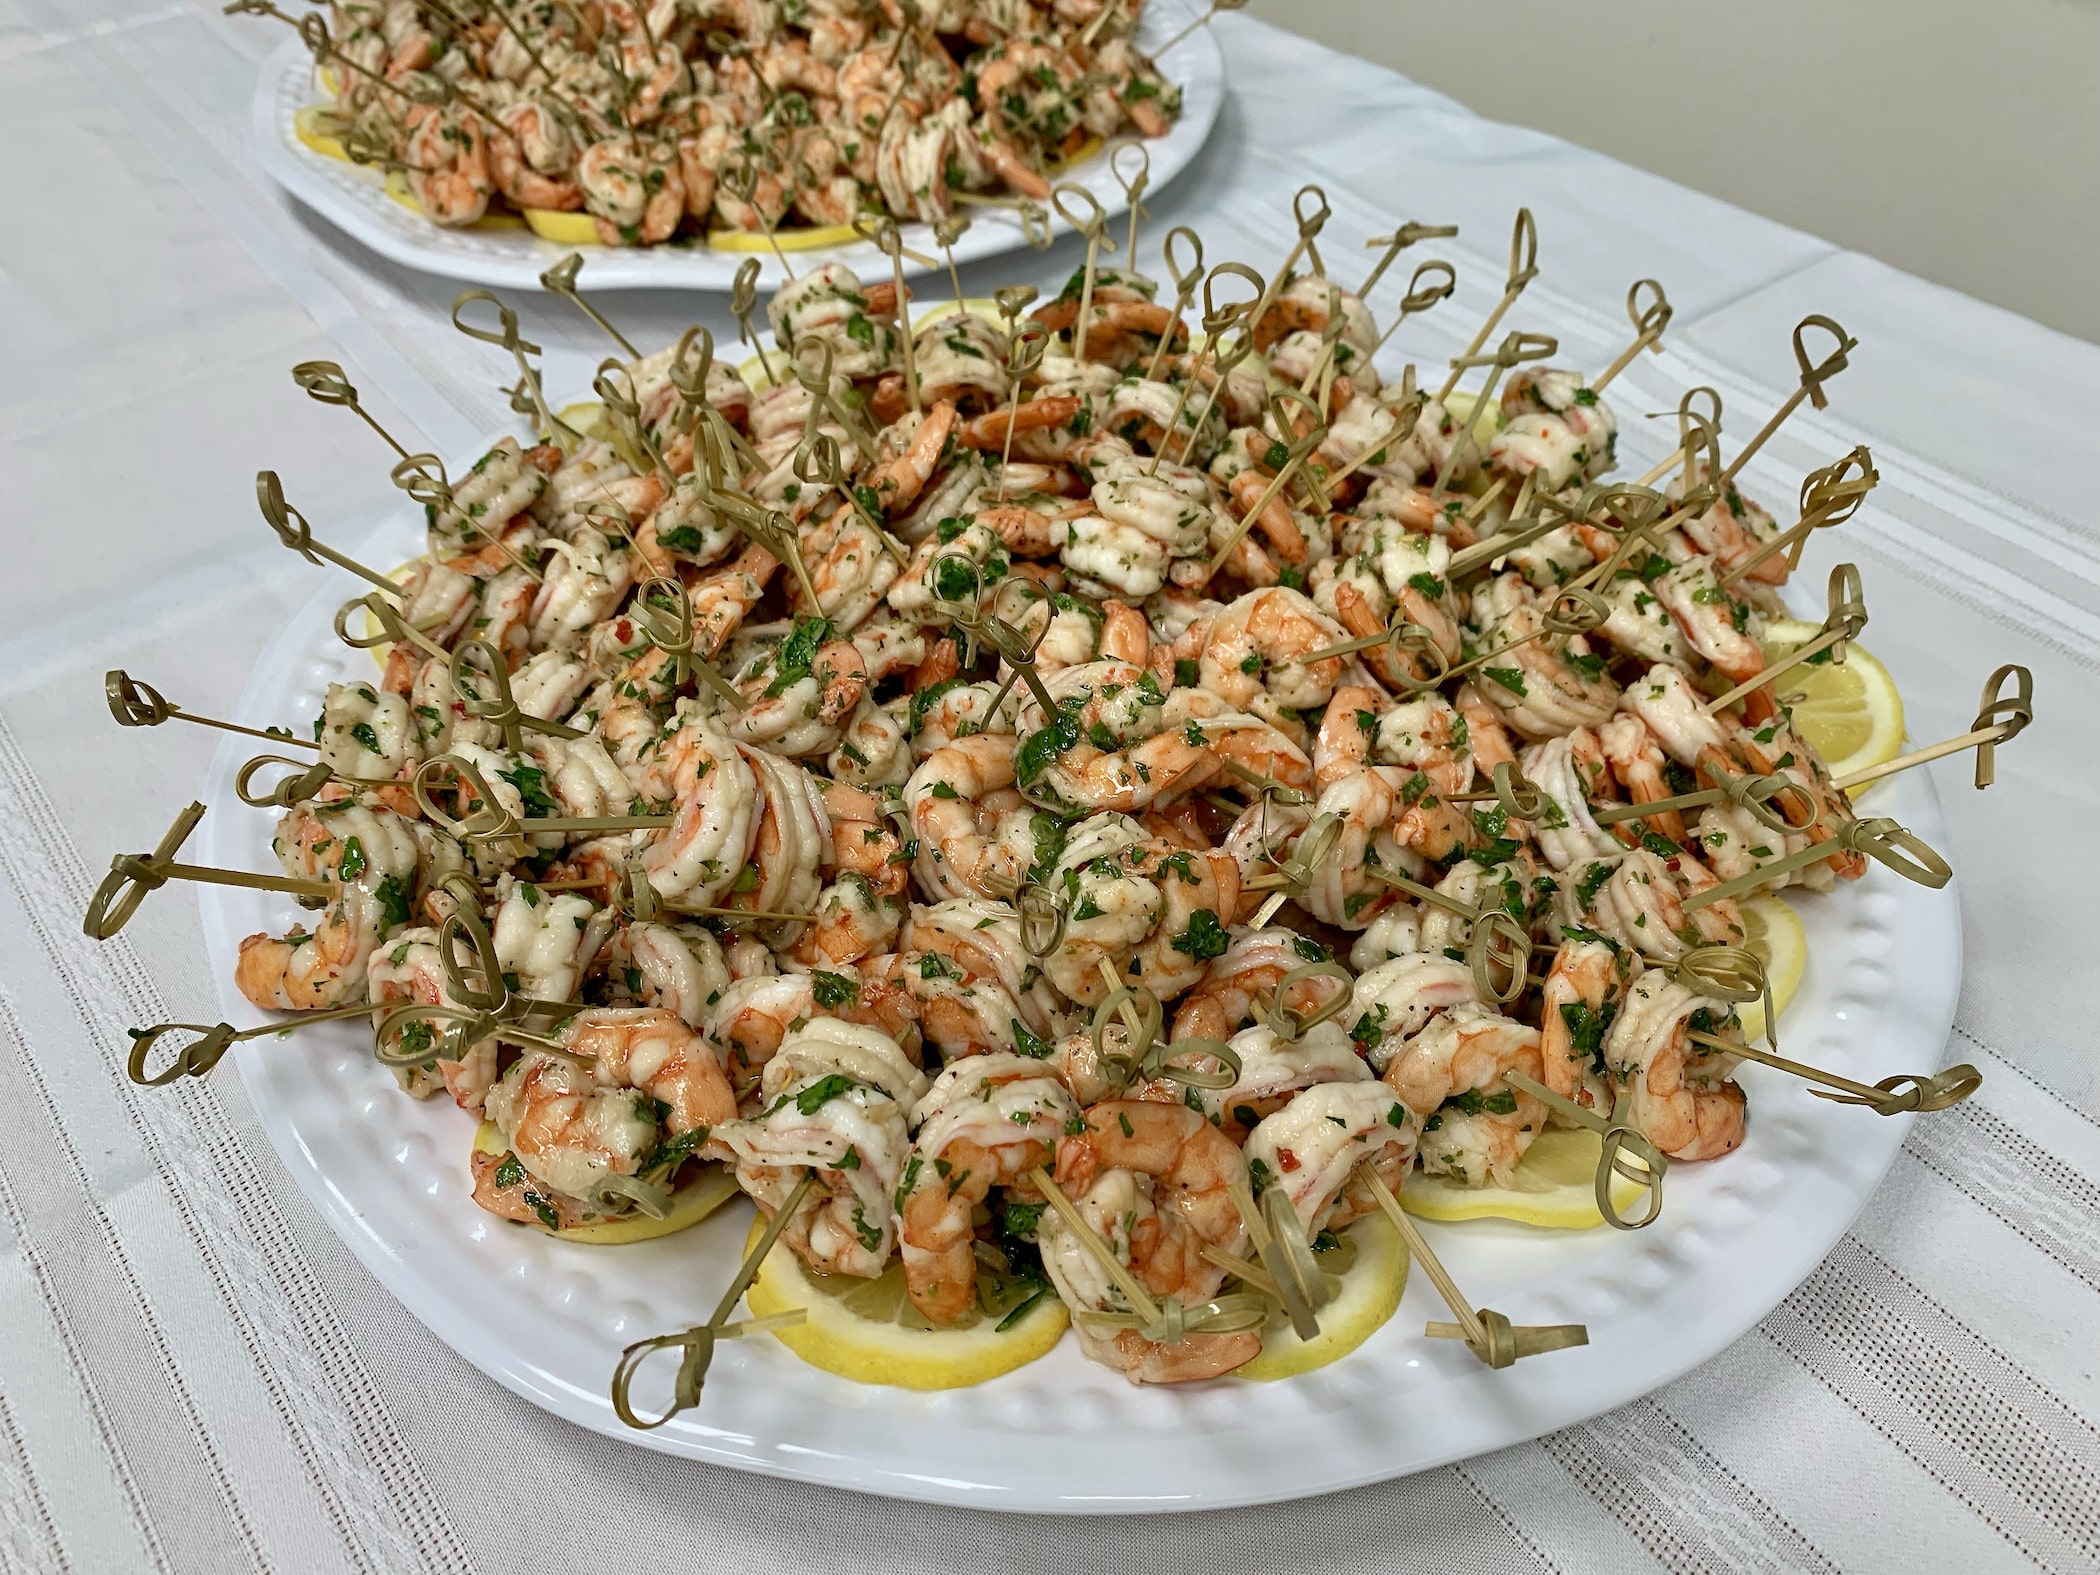 Zesty Marinated Shrimp, Southern-Style Pickled Shrimp or Marinated Shrimp and Artichoke Hearts served on a skewer.